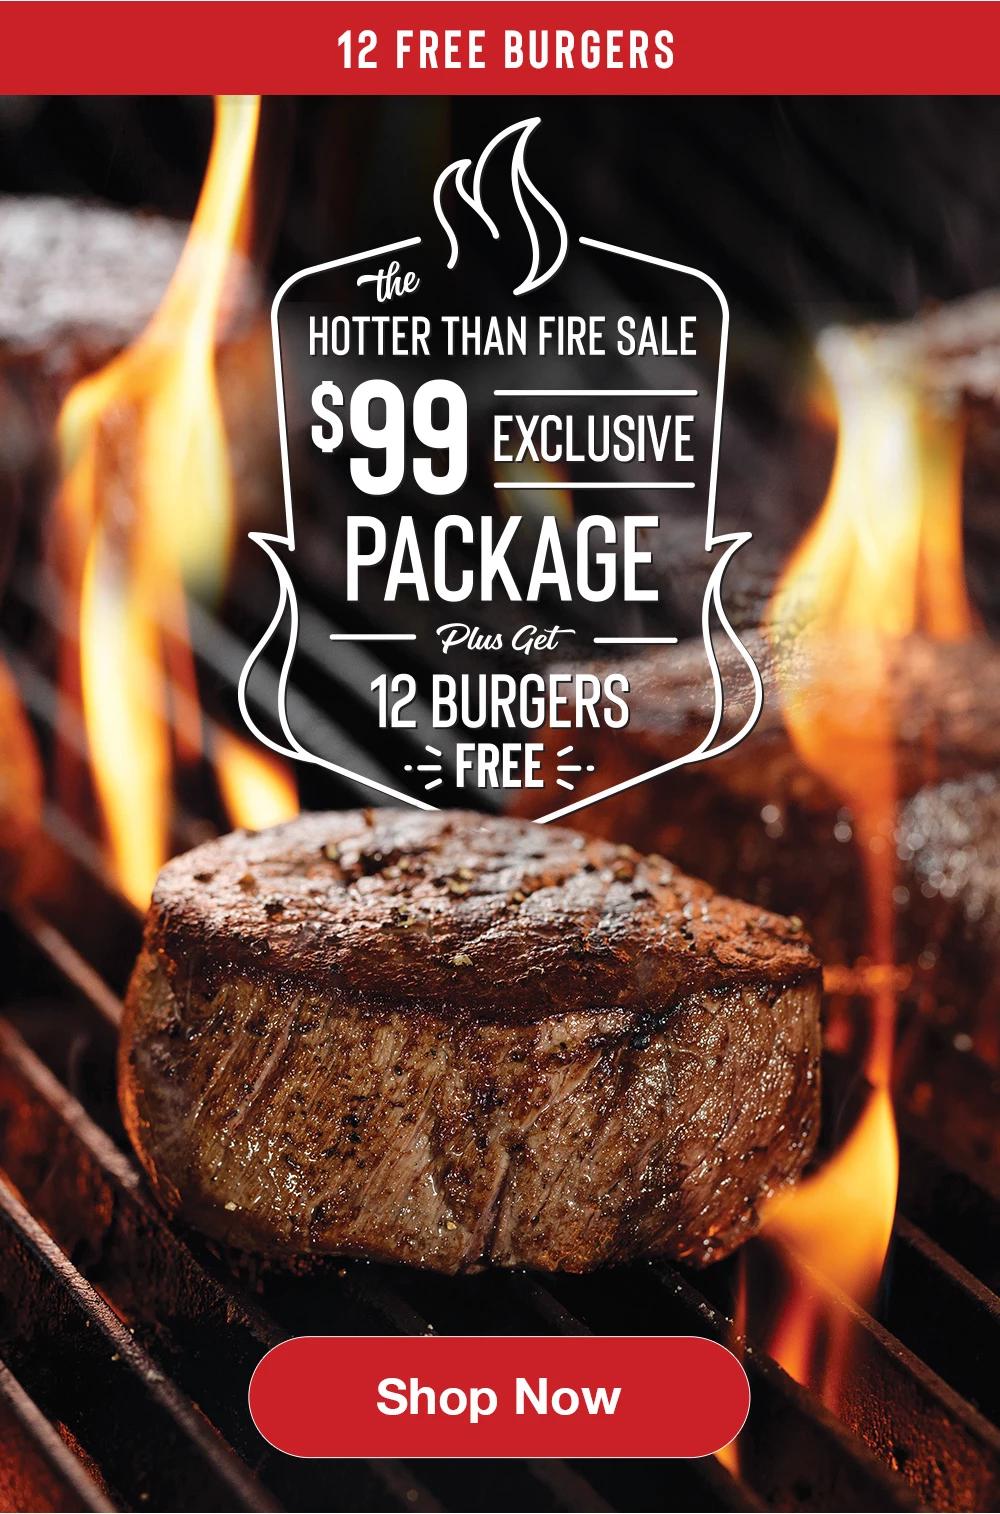 Don't miss out: $99 package + 12 FREE burgers! - Omaha Steaks